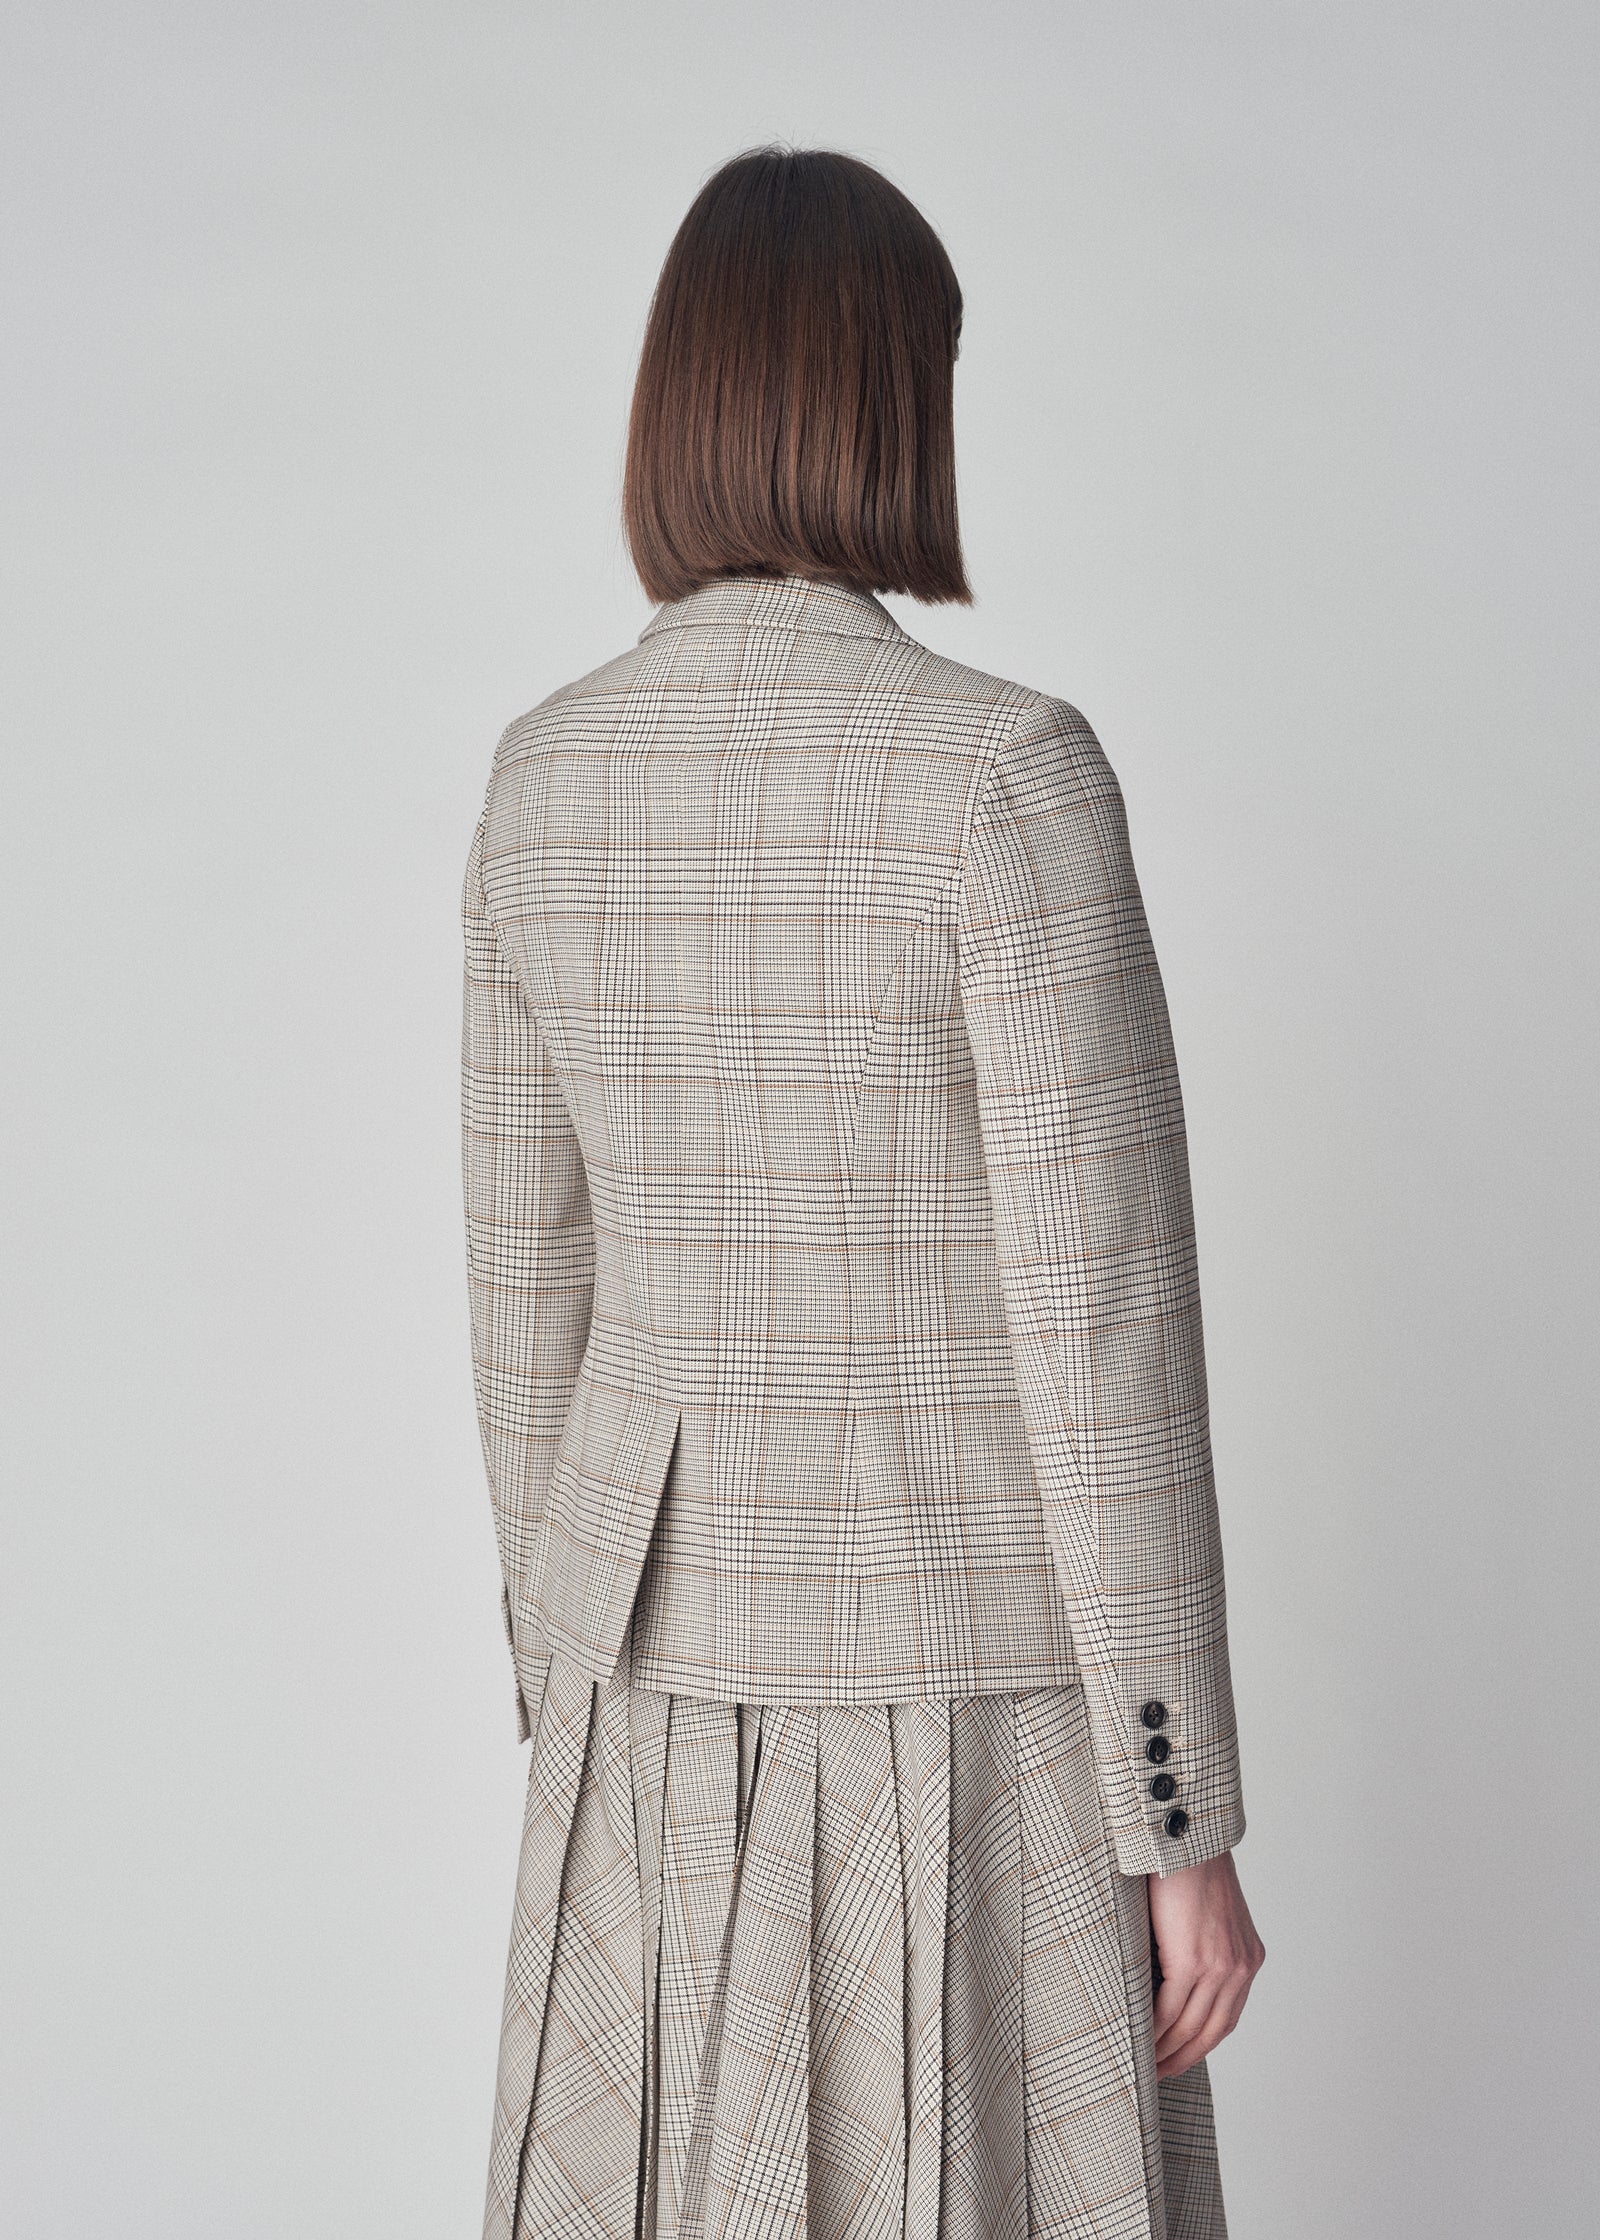 Schoolboy Blazer in Virgin Wool  - Taupe Plaid - CO Collections